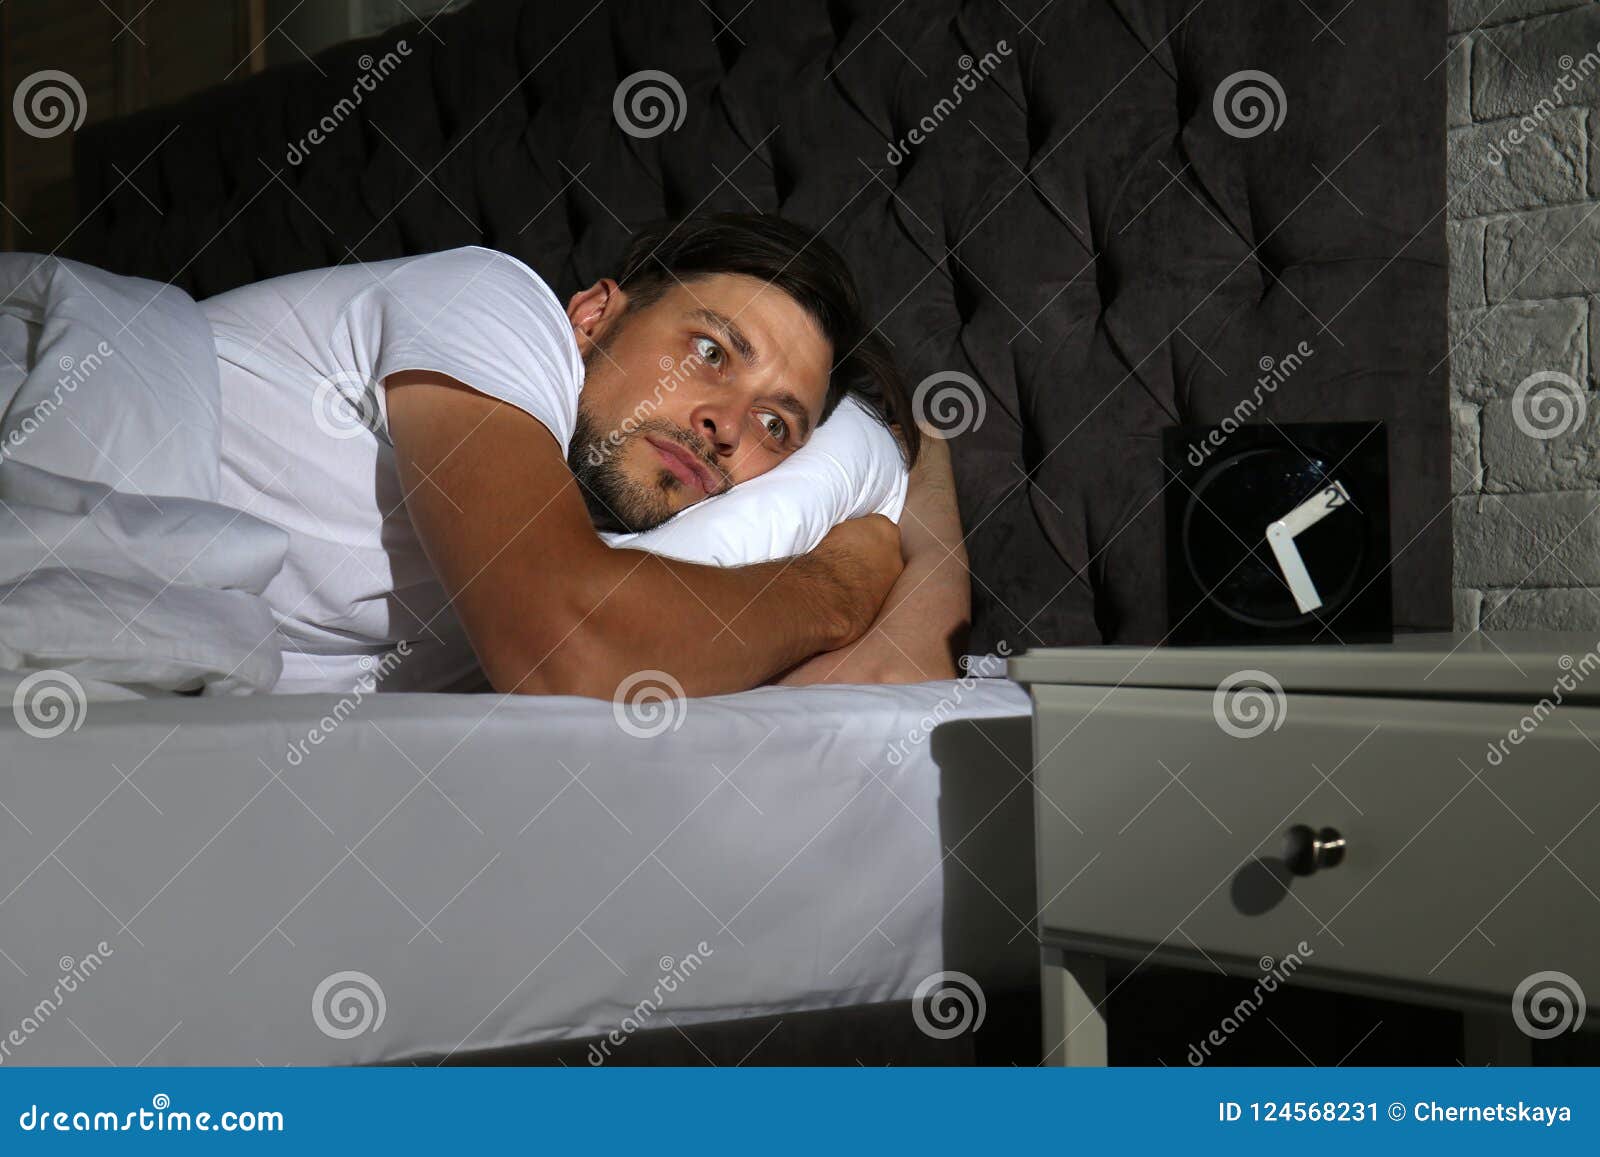 Man Suffering from Insomnia in Bed Stock Image - Image of clock, person ...